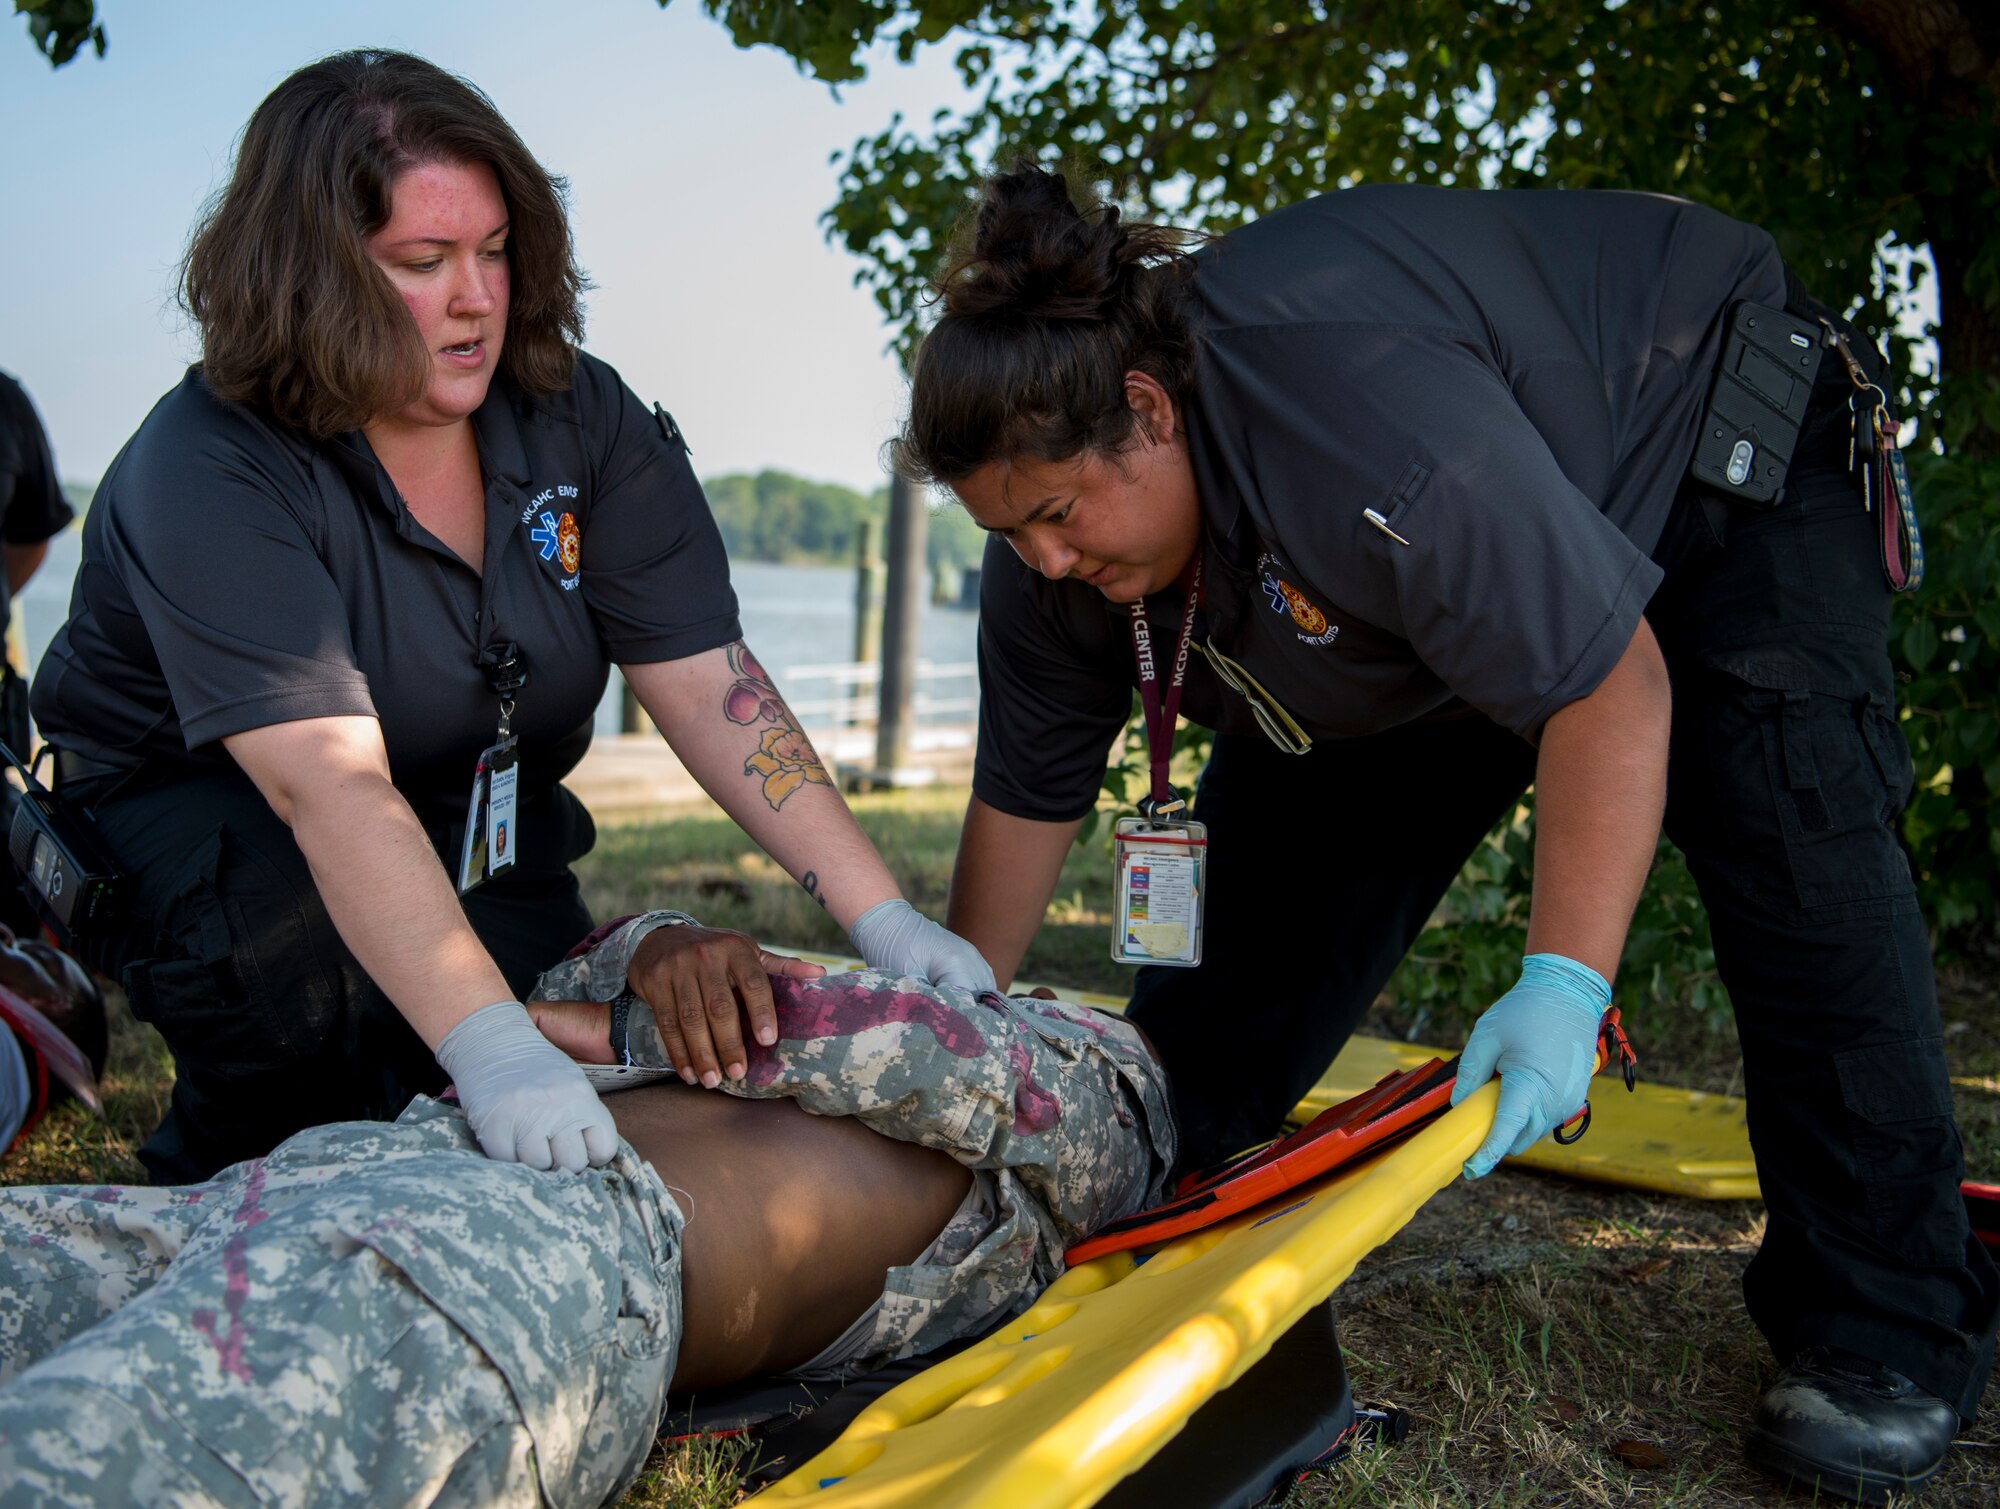 McDonald Army Health Center emergency services personnel work to secure a patient during an aircraft crash exercise at Joint Base Langley-Eustis, Virginia, July 17, 2018.